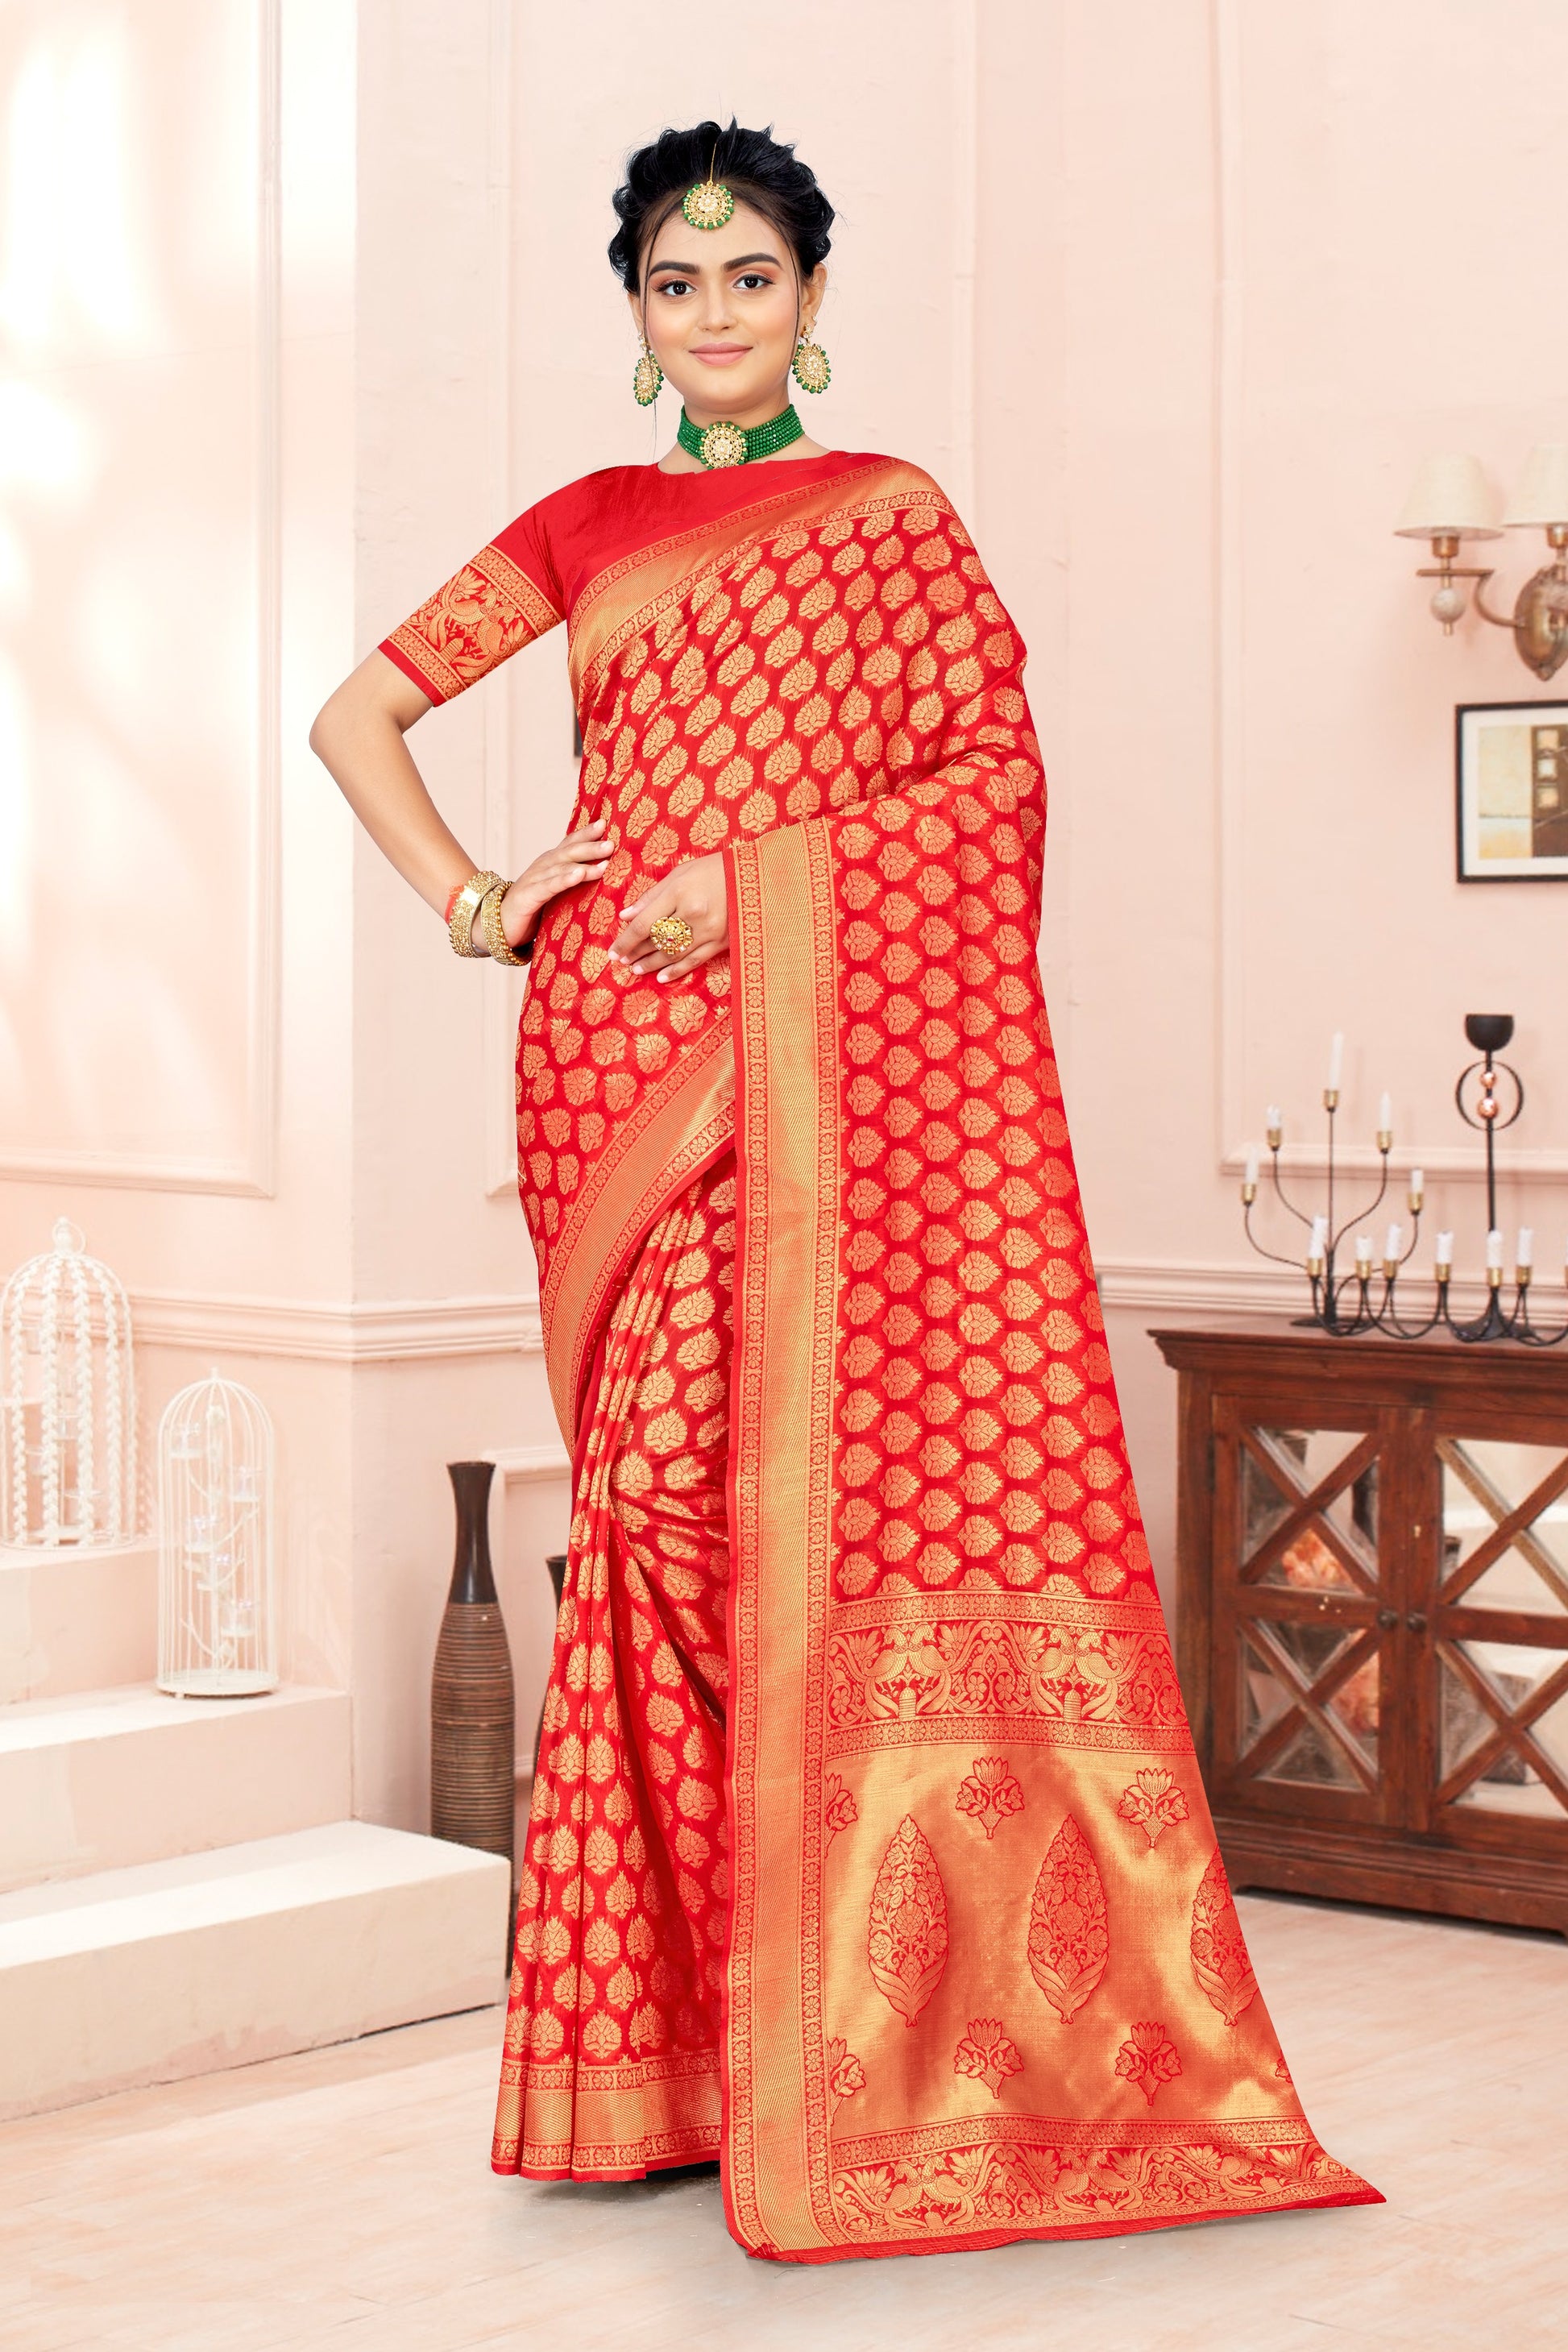 FASHION BOOMS RED BANARSI SILK TRADITIONAL SAREE FOR WHOLE FAMILY TO WEAR ON ANY OCCASION .